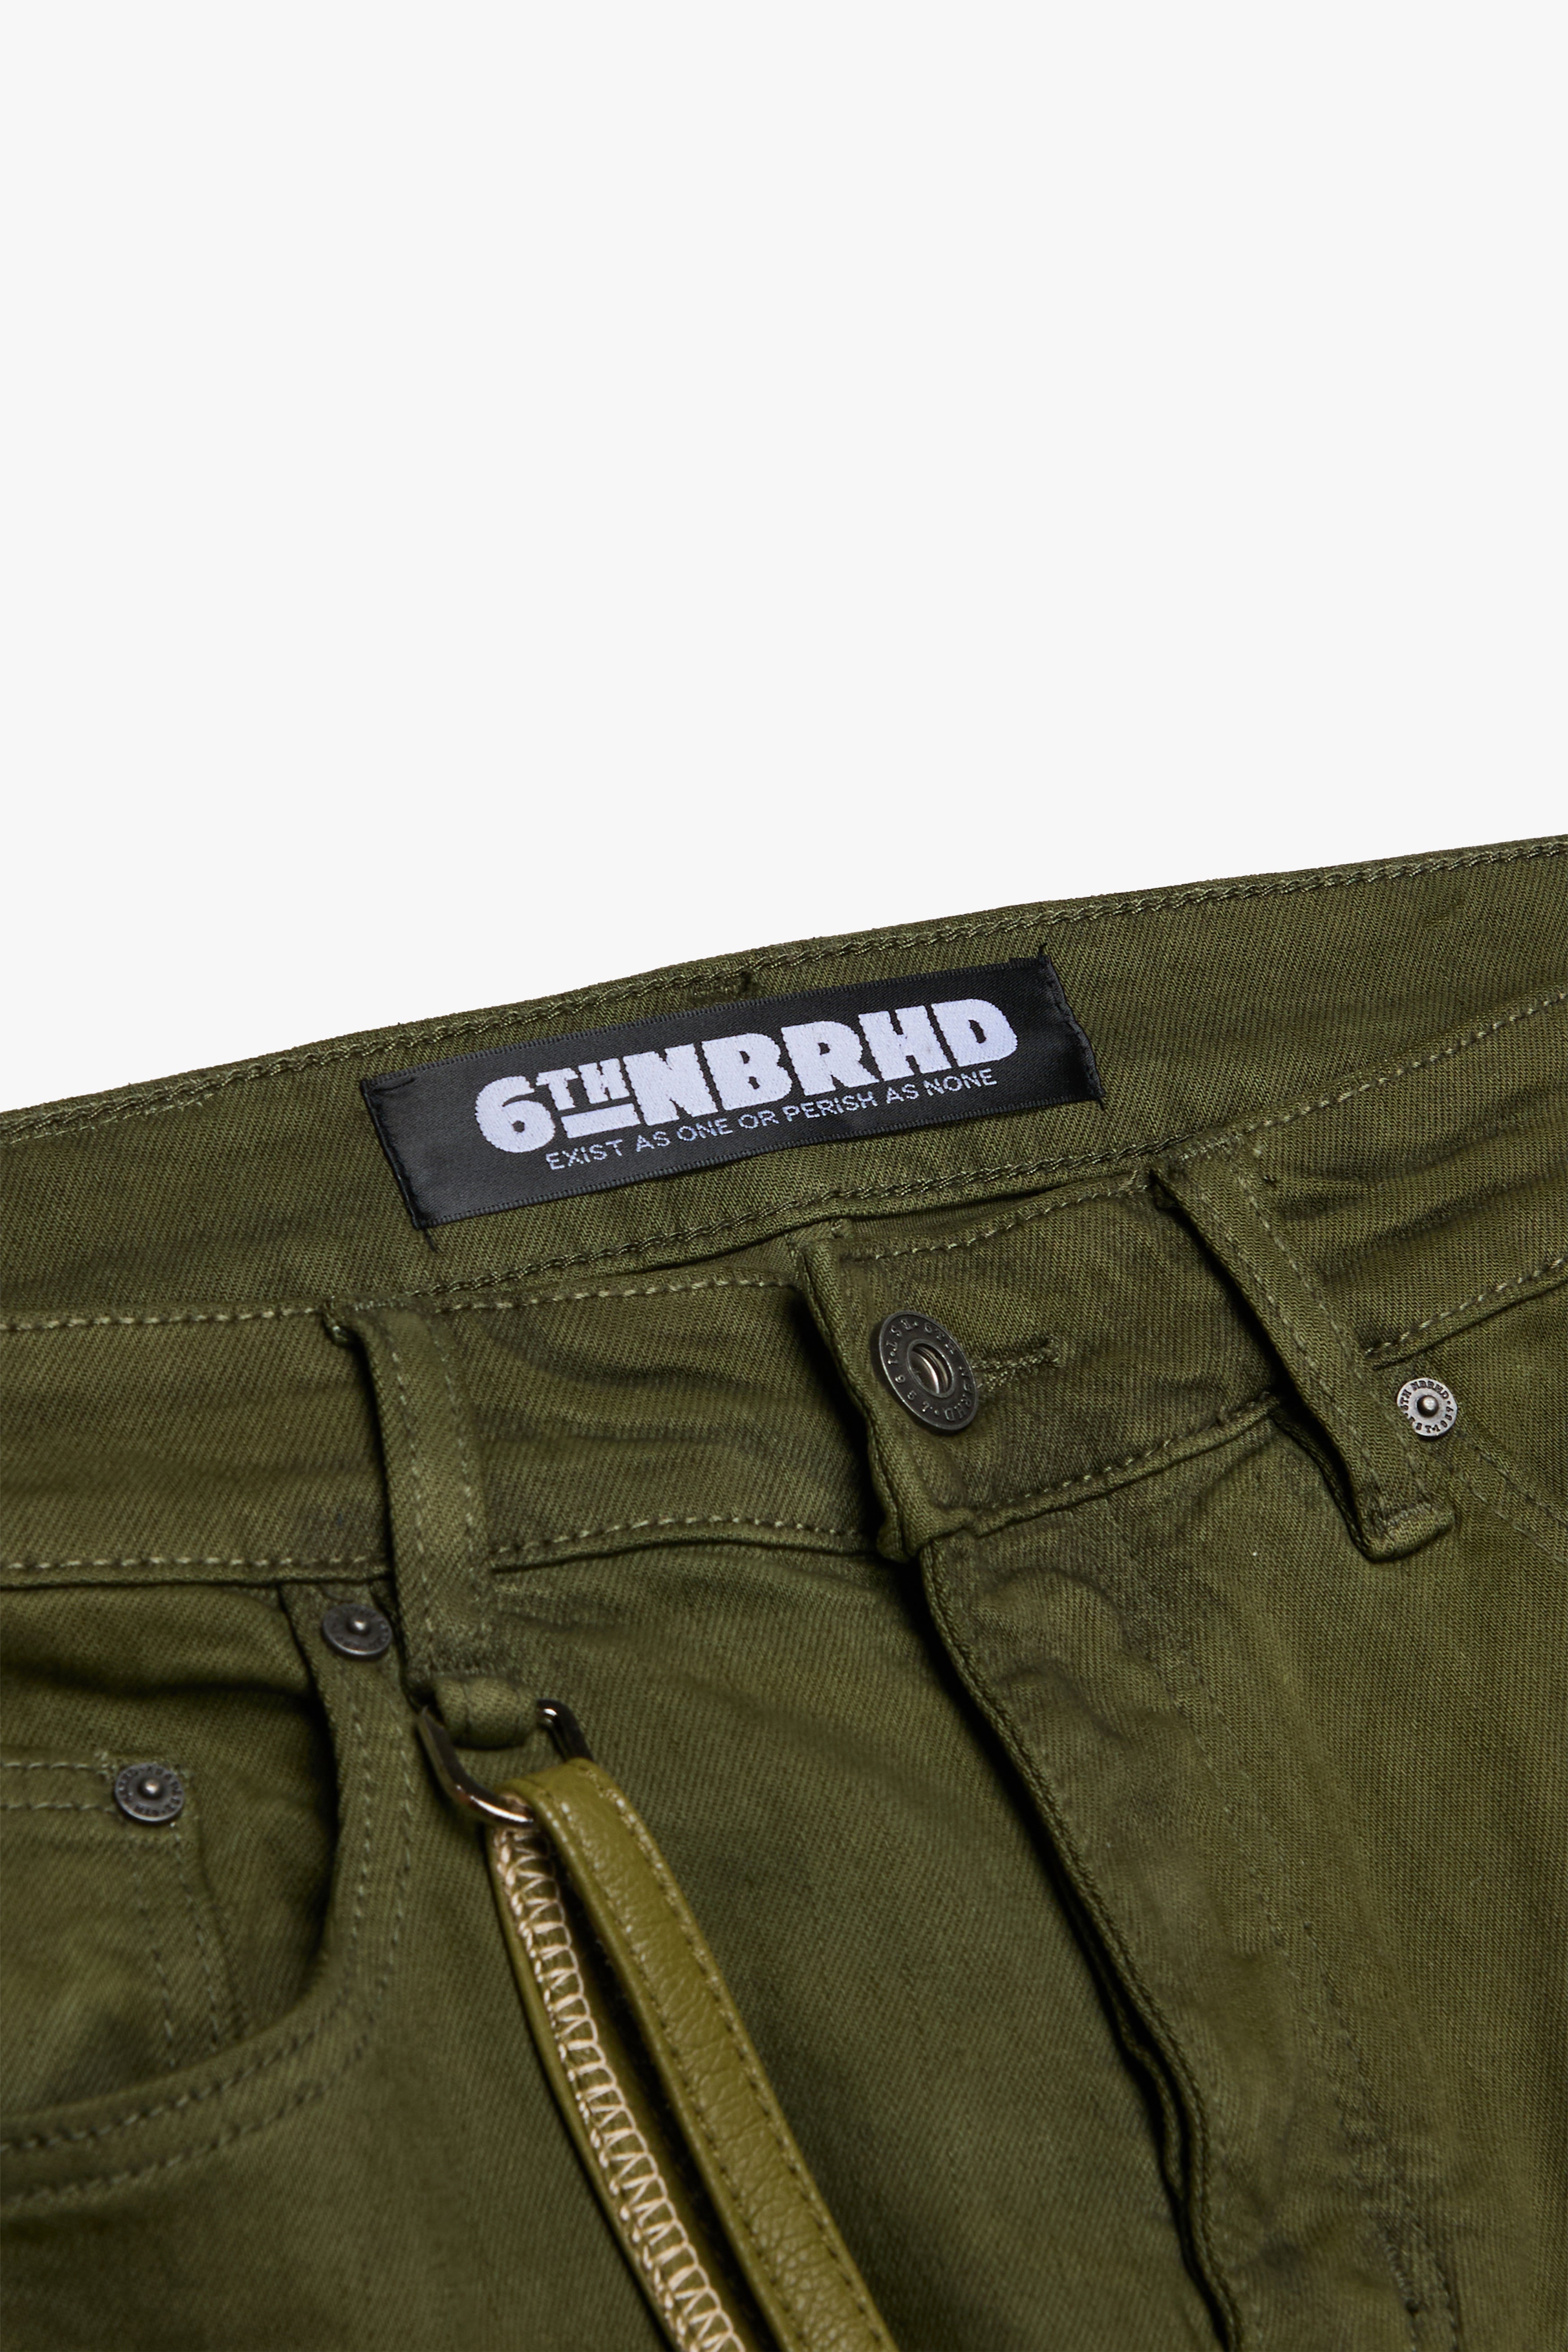 6thNBRHD STACKED "INDIANA" -OLIVE